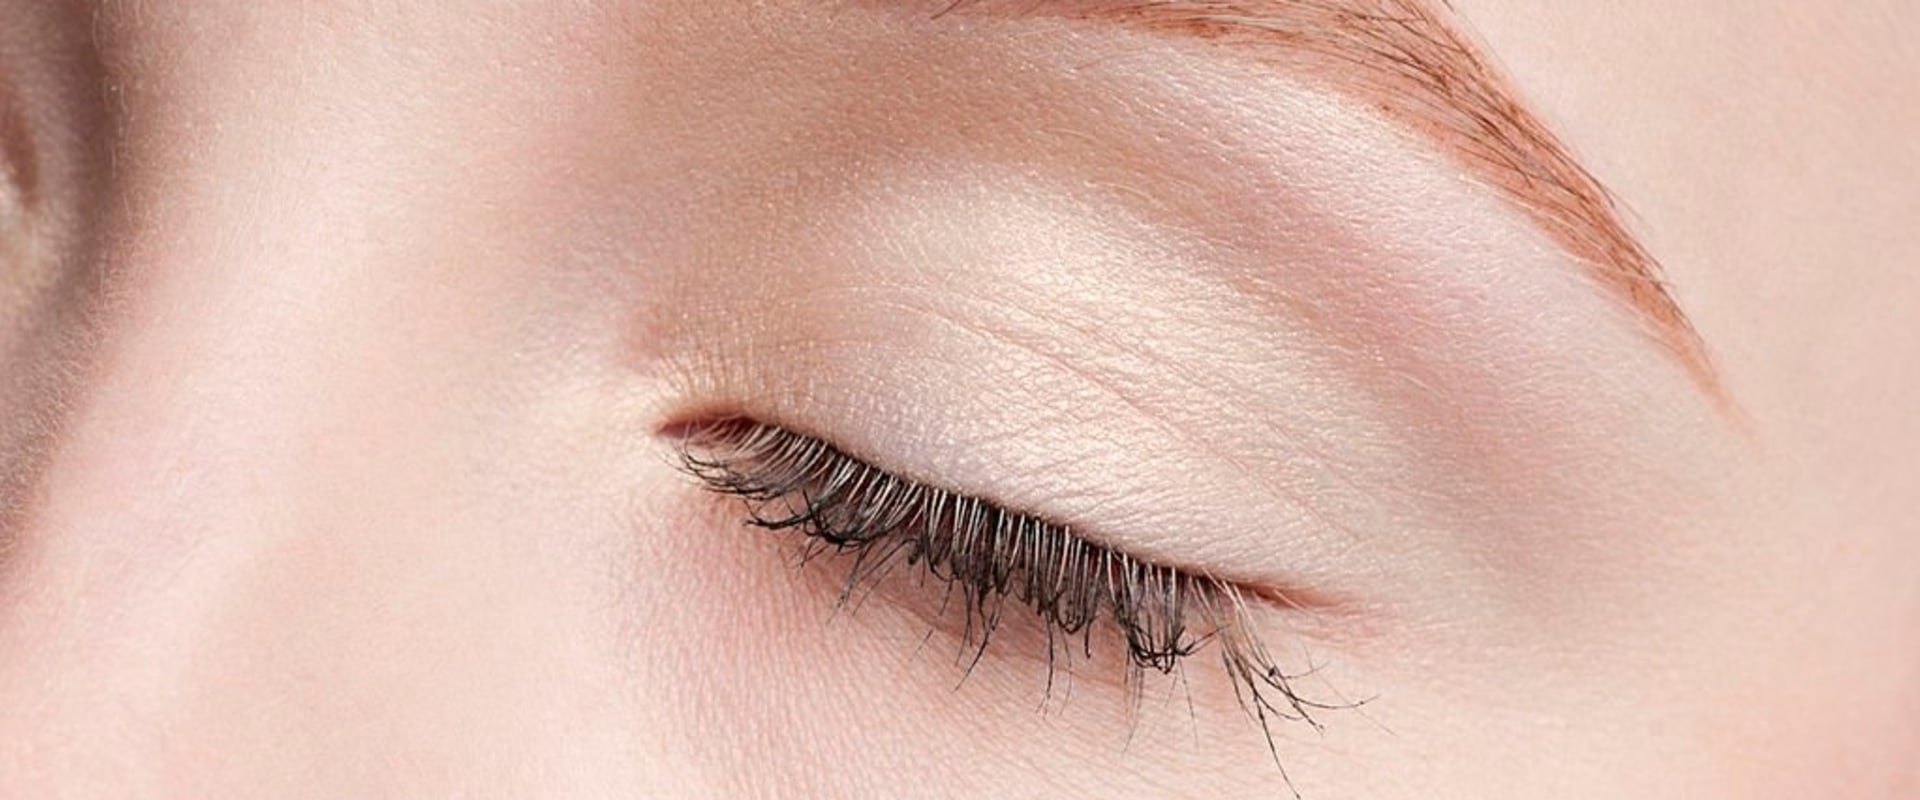 Is it normal for eyelash extensions to fall out right away?